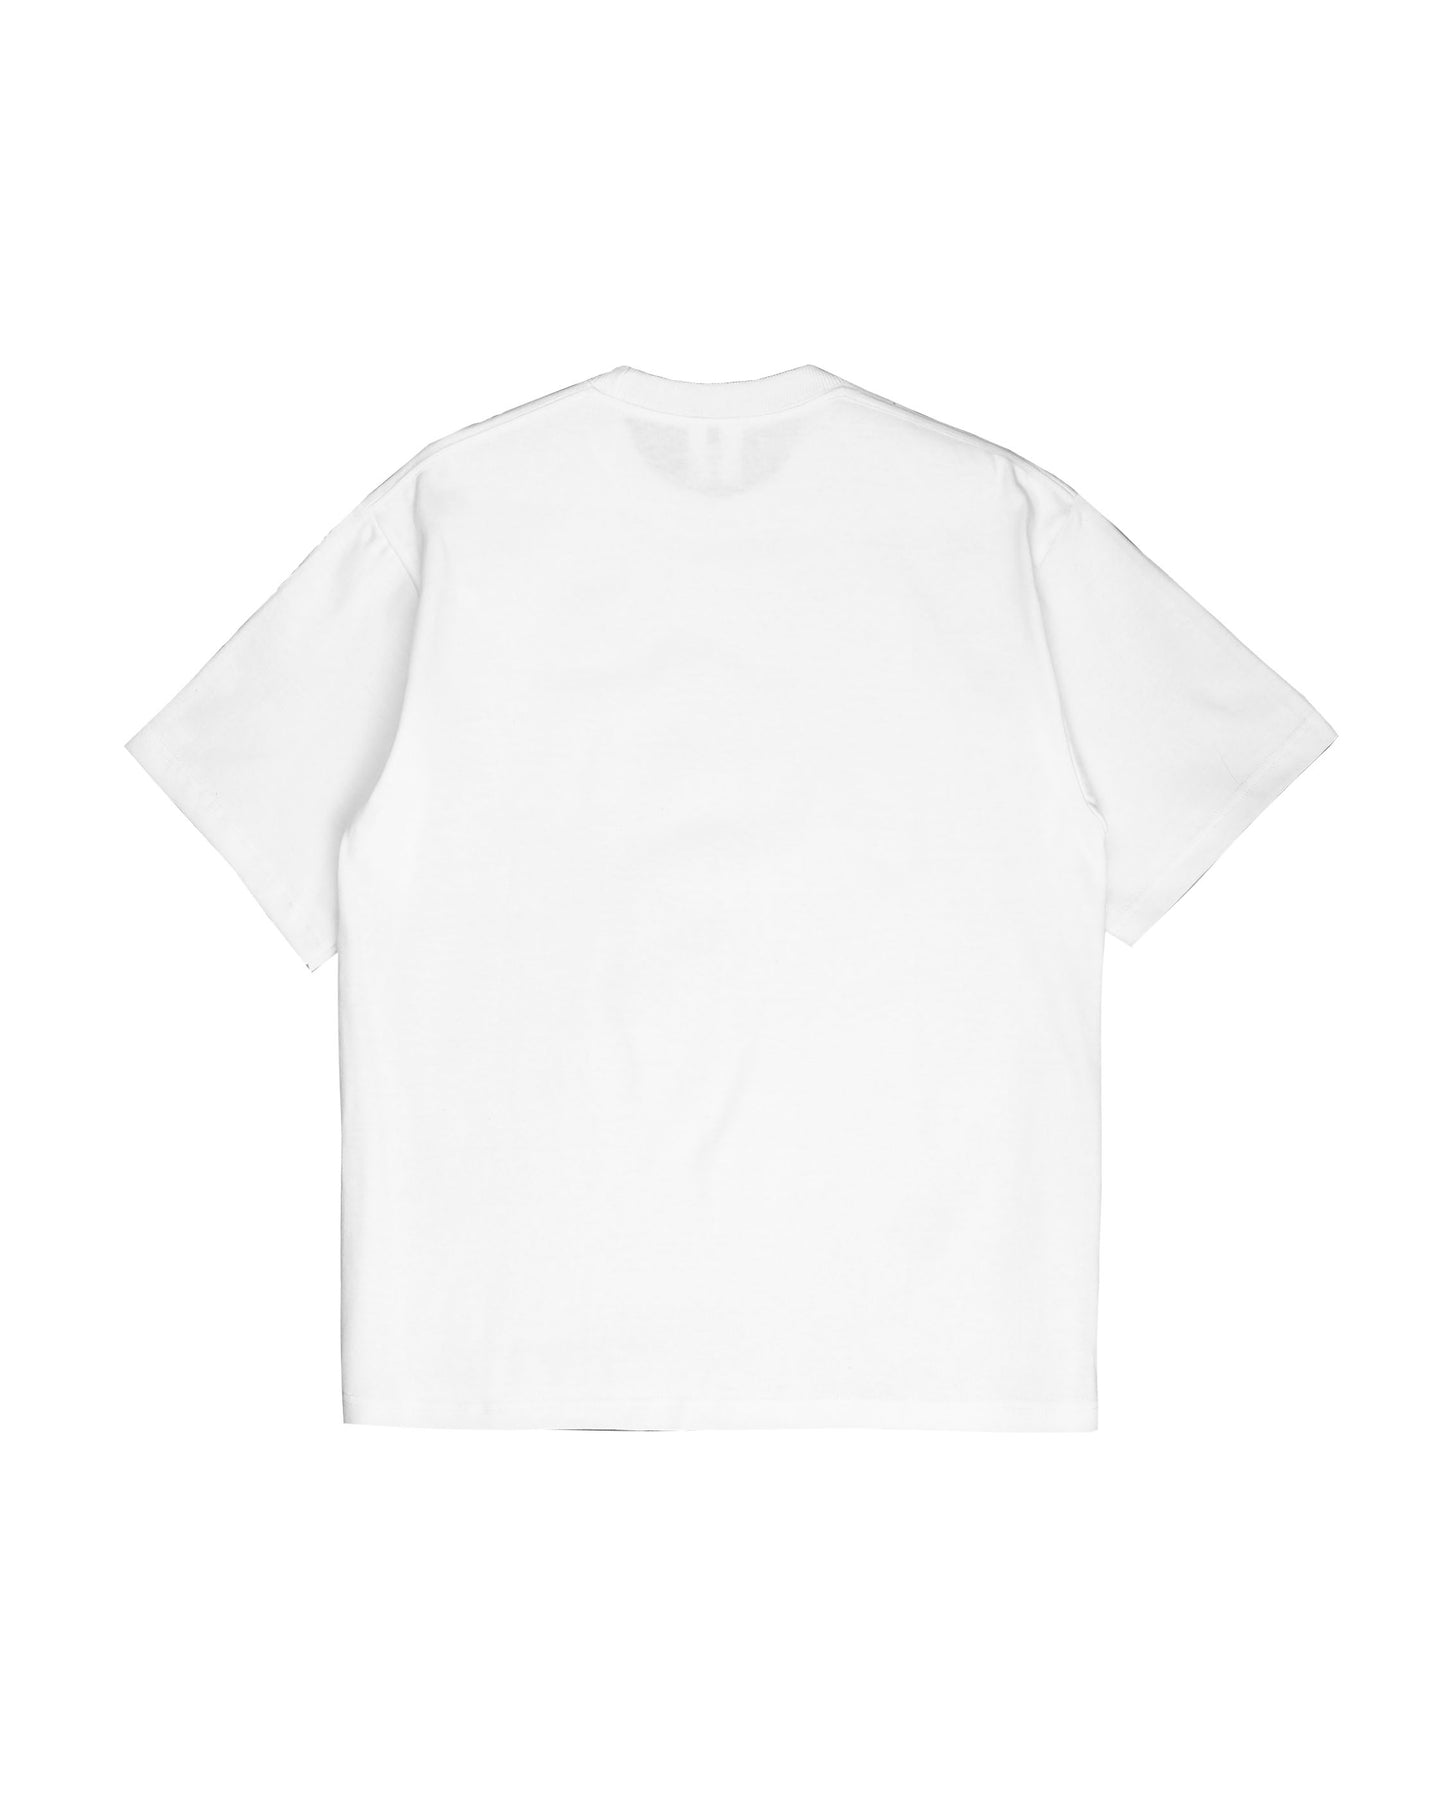 Sator White Relaxed Fit Tees